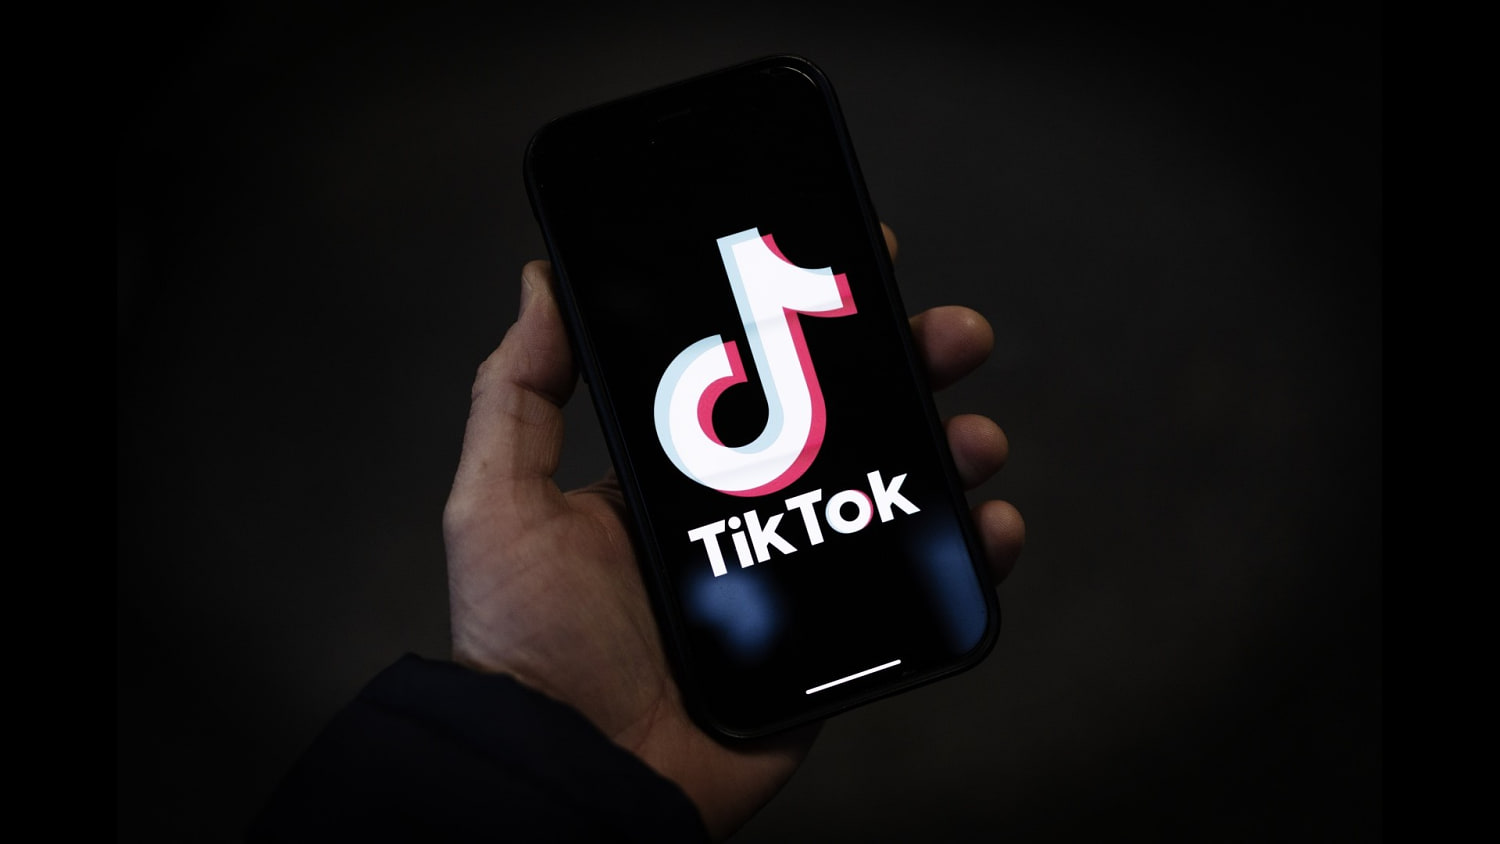 Senators in both parties signal potential support for bill that could ban TikTok